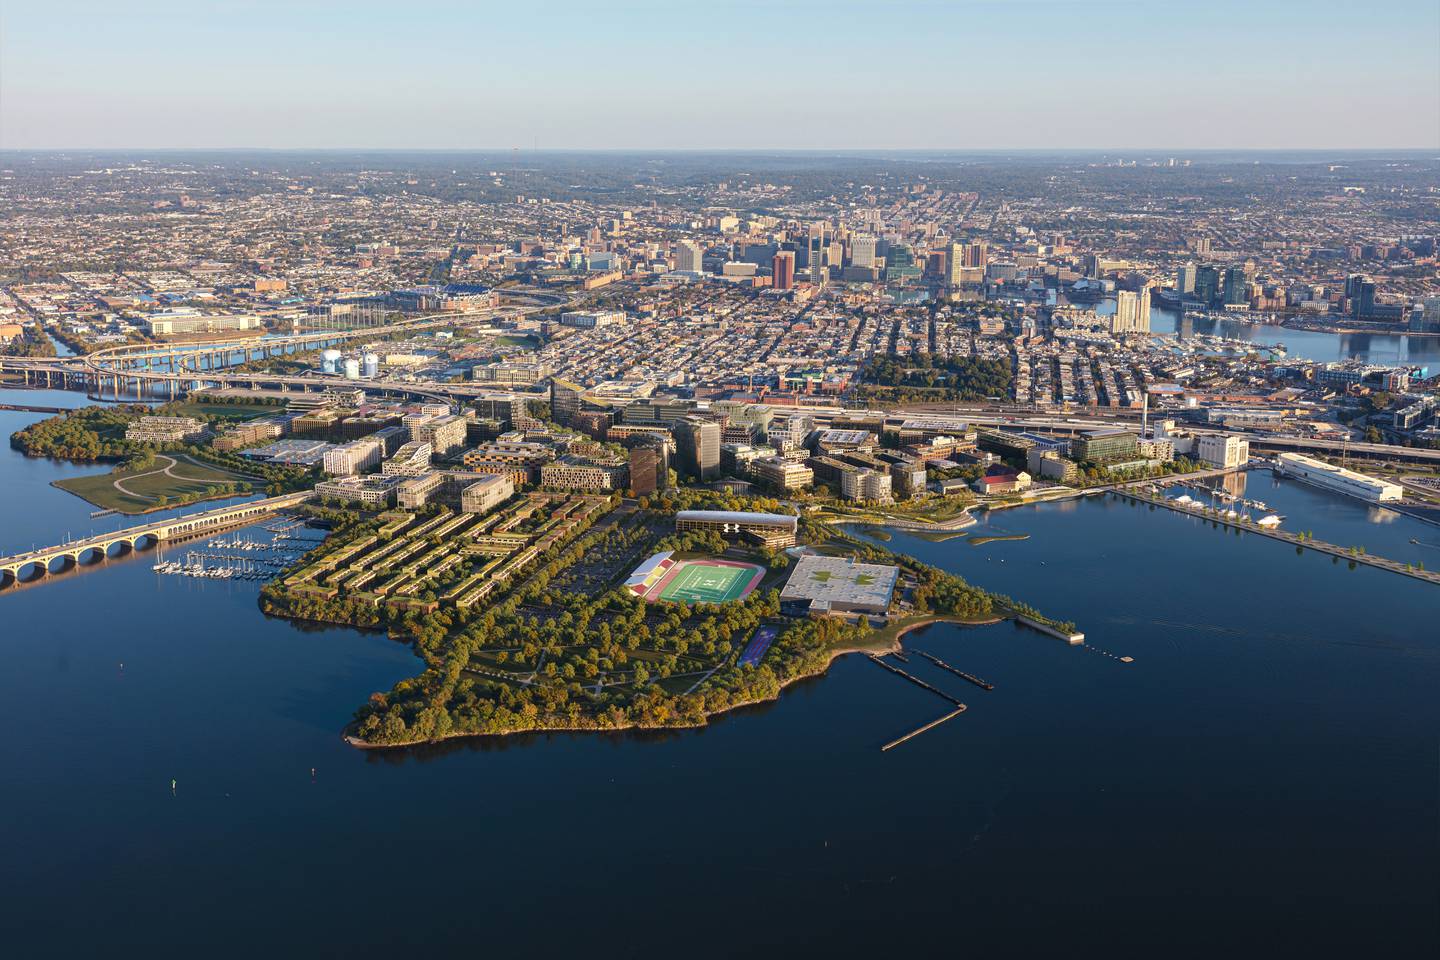 Digital rendering shows hypothetical aerial view of Baltimore Peninsula with new development, with Federal Hill, Inner Harbor and rest of Baltimore City in background.